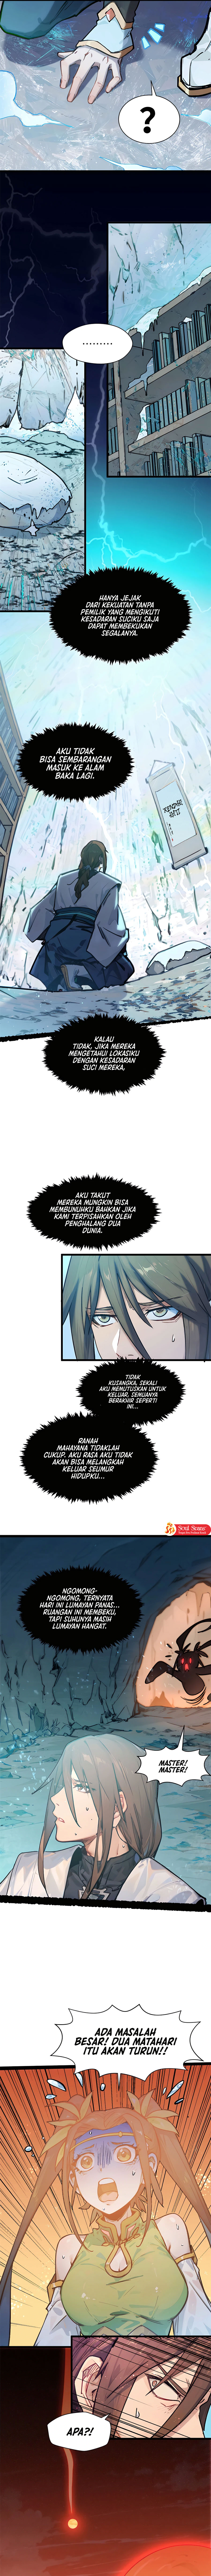 Dilarang COPAS - situs resmi www.mangacanblog.com - Komik top tier providence secretly cultivate for a thousand years 148.5 - chapter 148.5 149.5 Indonesia top tier providence secretly cultivate for a thousand years 148.5 - chapter 148.5 Terbaru 13|Baca Manga Komik Indonesia|Mangacan